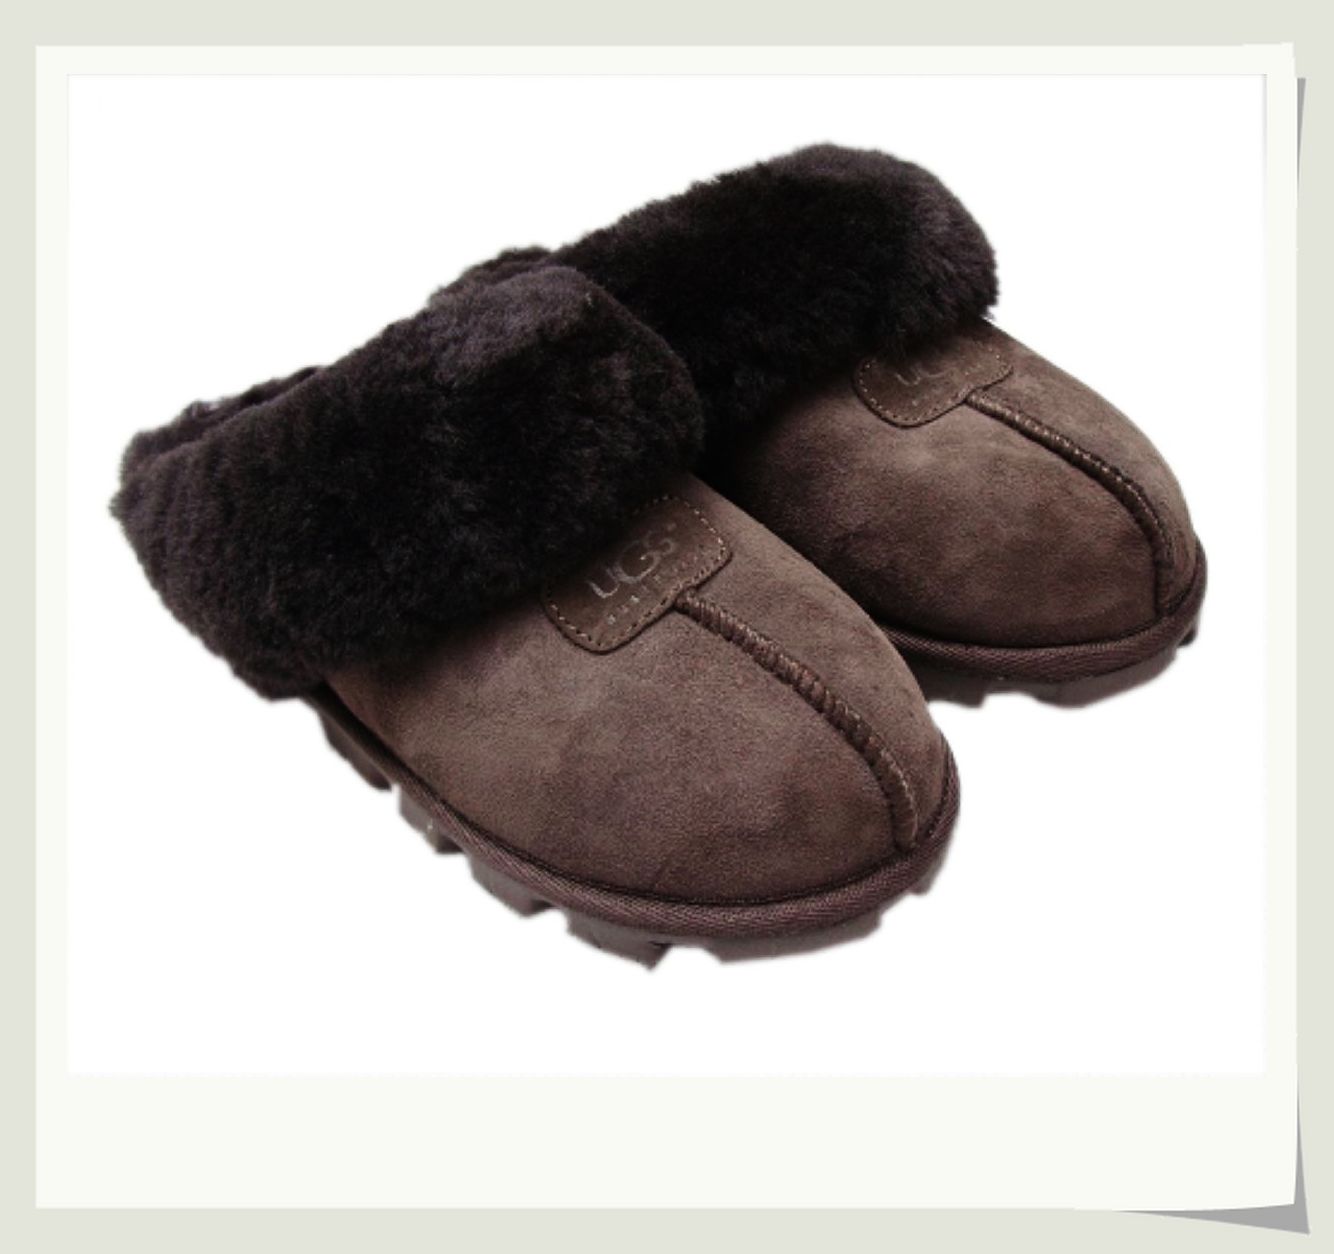 Outlet UGG Coquette Pantofole 5125 Chocolate Italia �C 176 Outlet UGG Coquette Pantofole 5125 Chocolate Italia �C 176